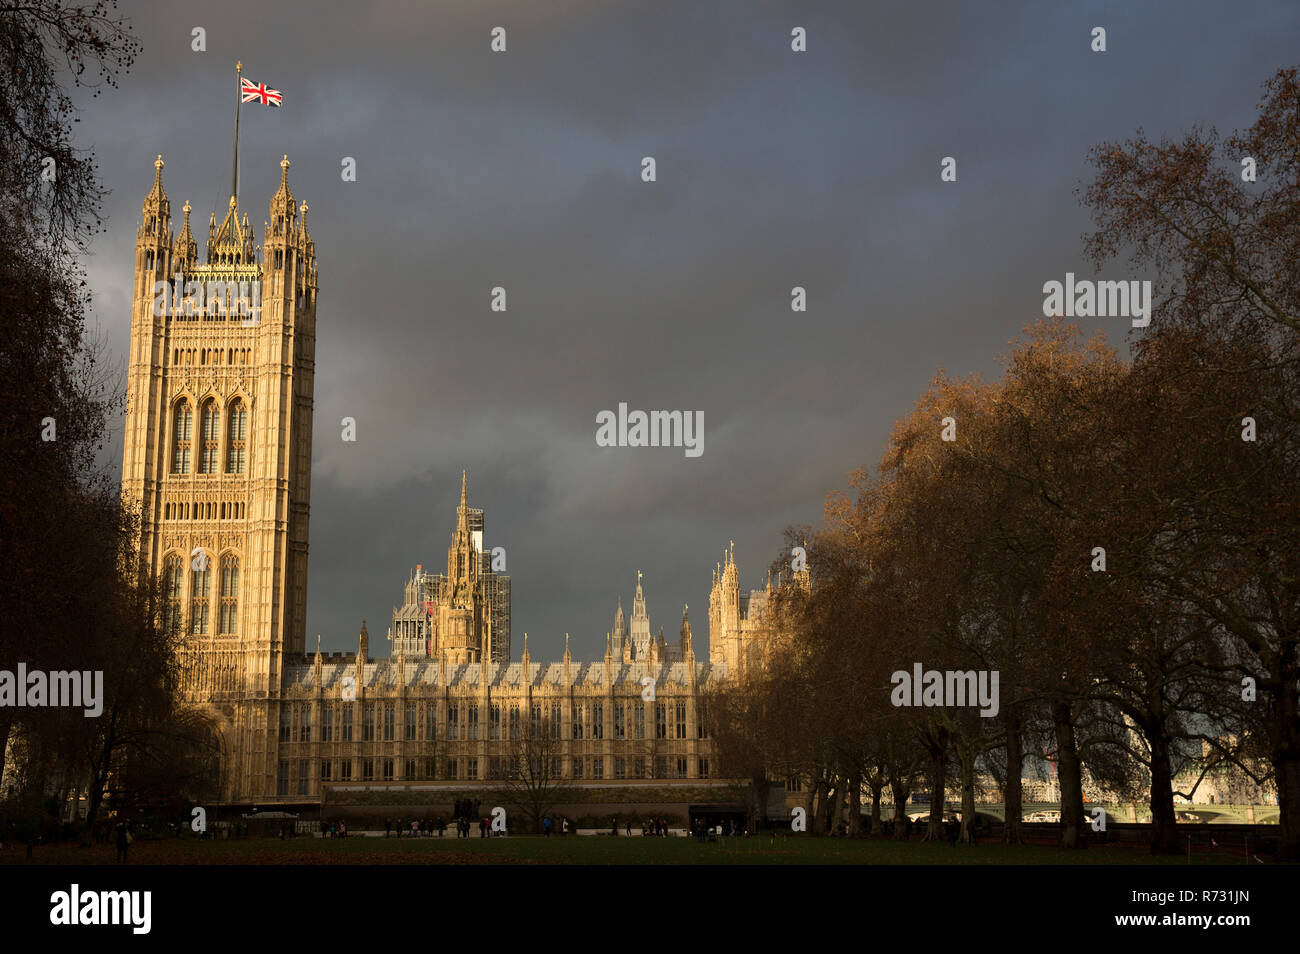 View of the Houses of Parliament from Victoria Tower Gardens against dramatic light Stock Photo